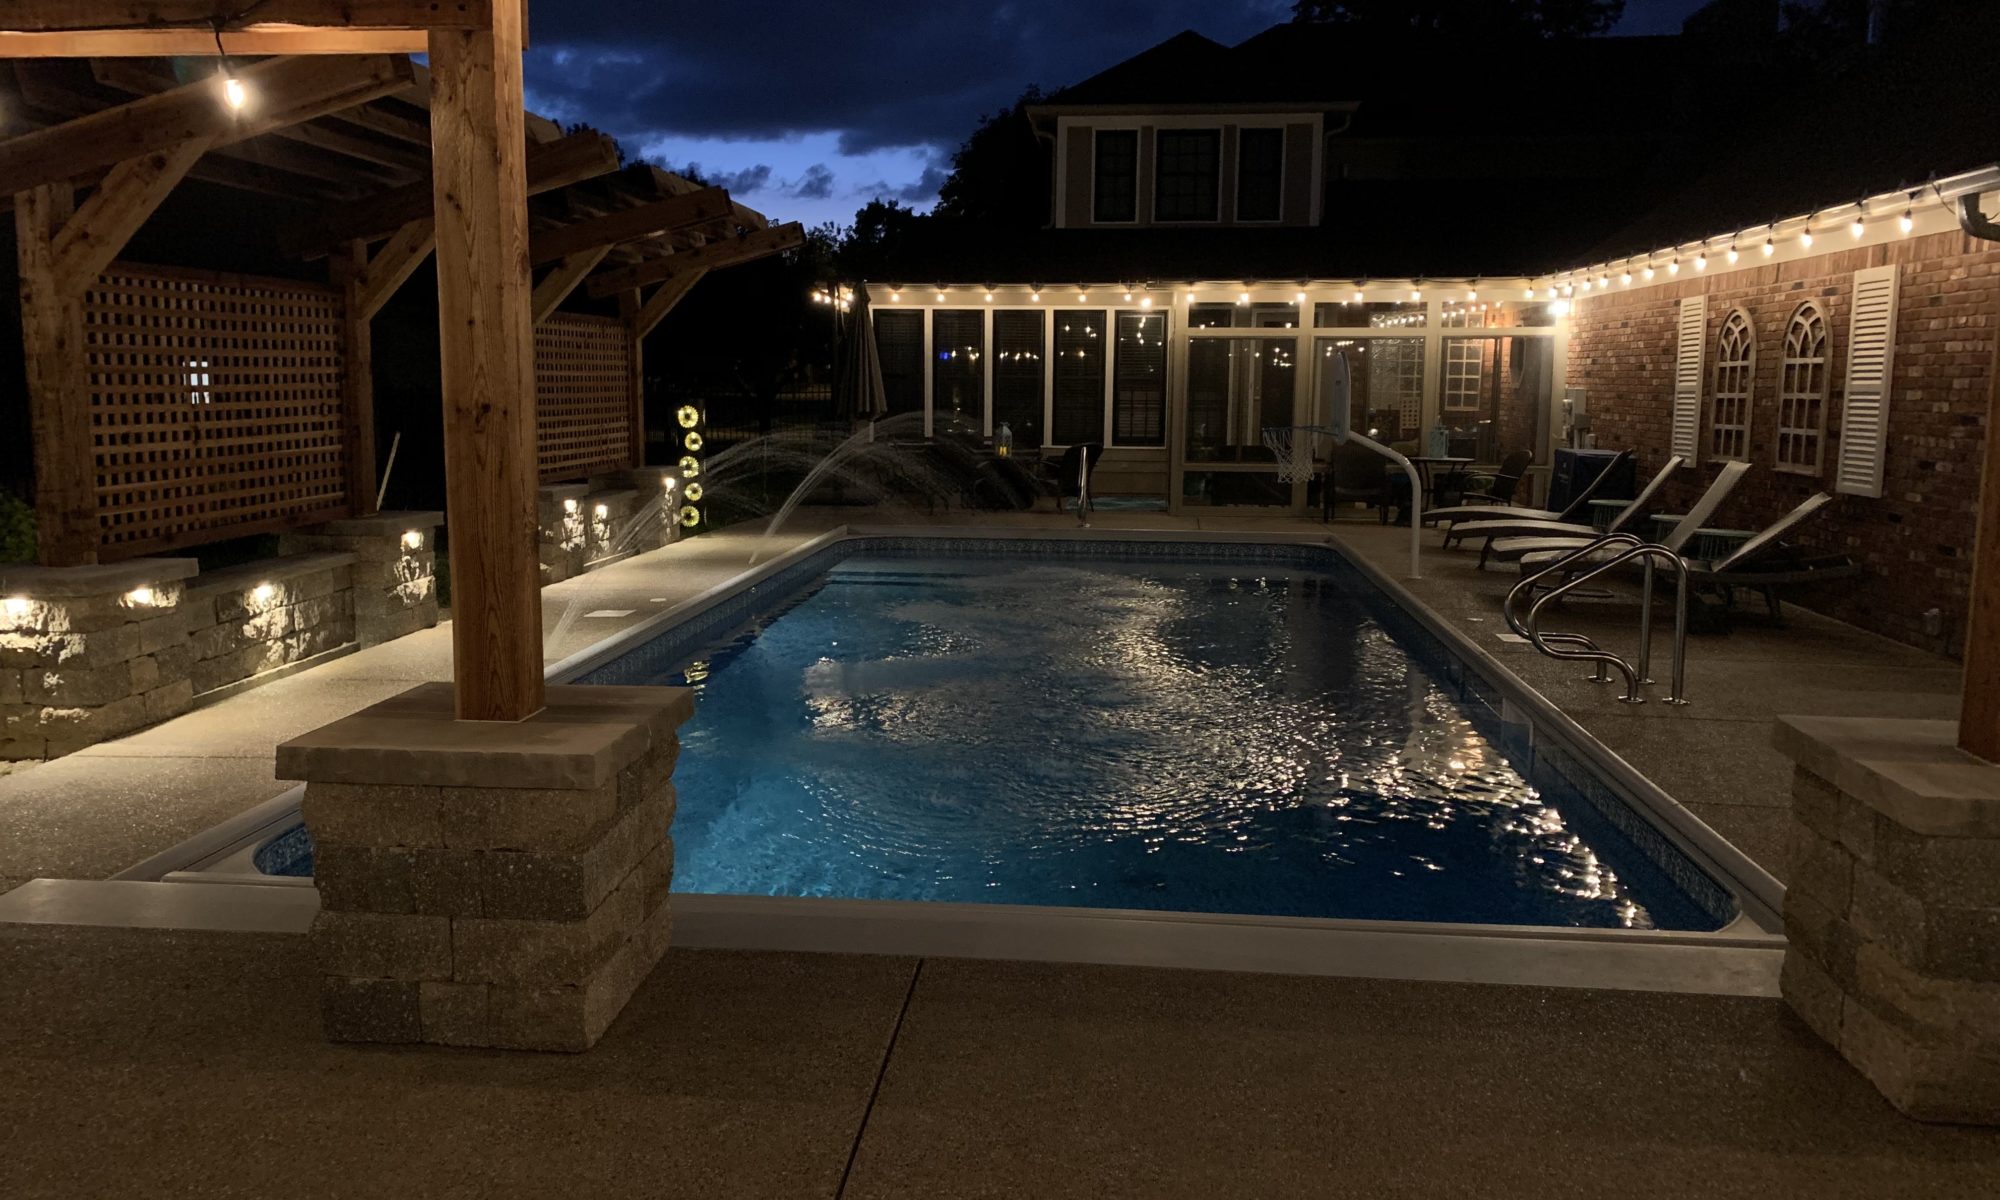 Precision Outdoors cannon cabana nights completed project night night time pool life fire table fire pit pool deck pergola outdoor kitchen timber structures retaining wall sun screens privacy screens outdoor dining entertaining space Greenwood Indiana